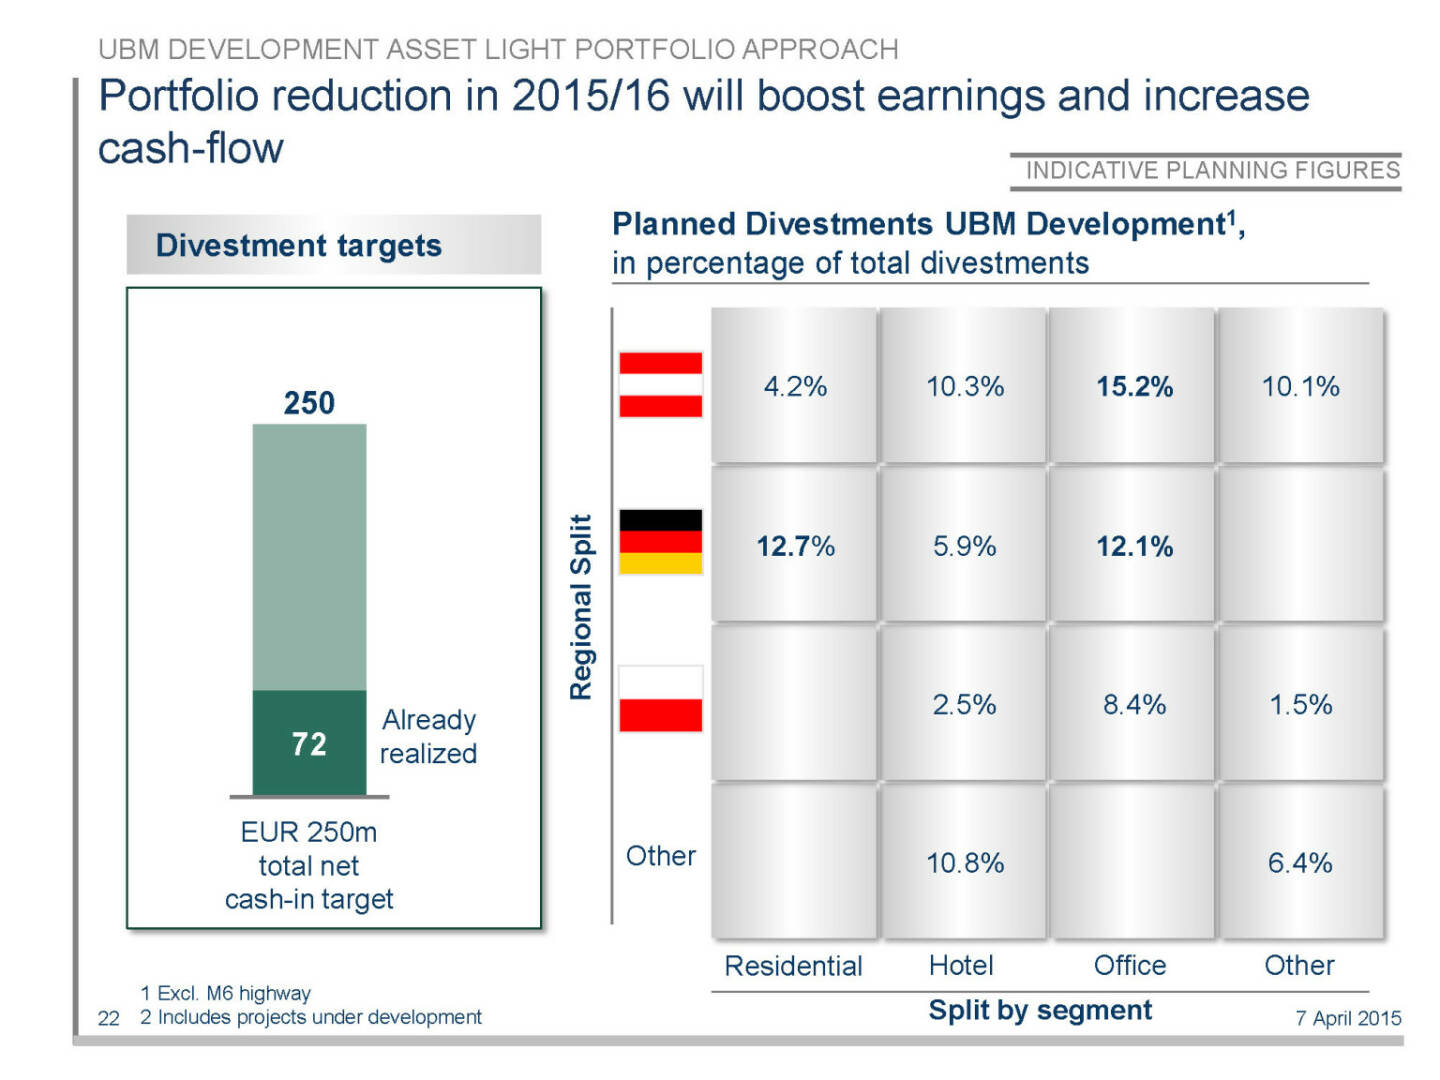 Portfolio reduction in 2015/16 will boost earnings and increase ￼cash-flow